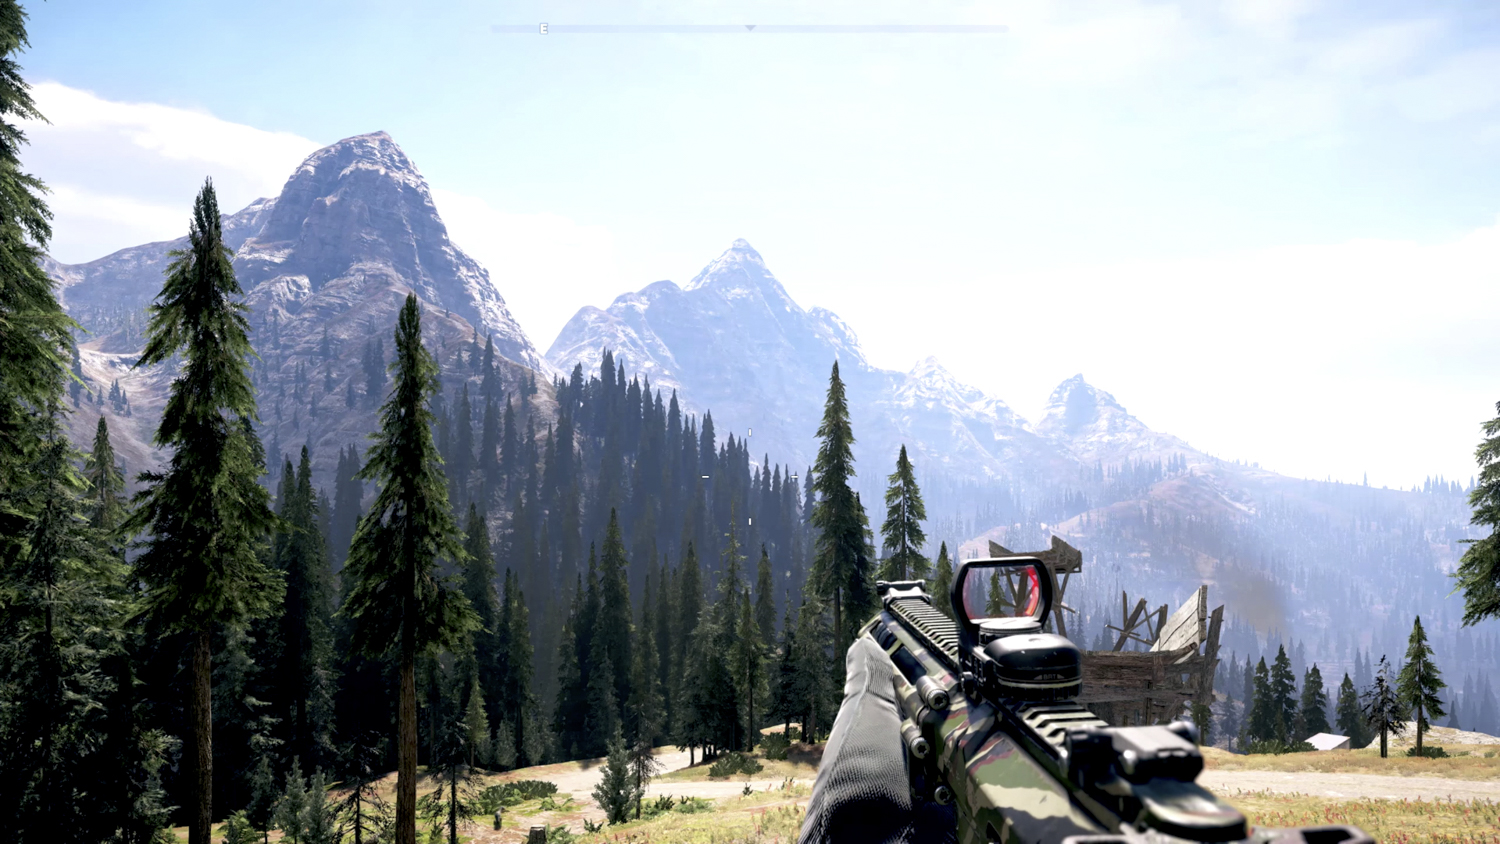 Far Cry 5 PC Performance Review